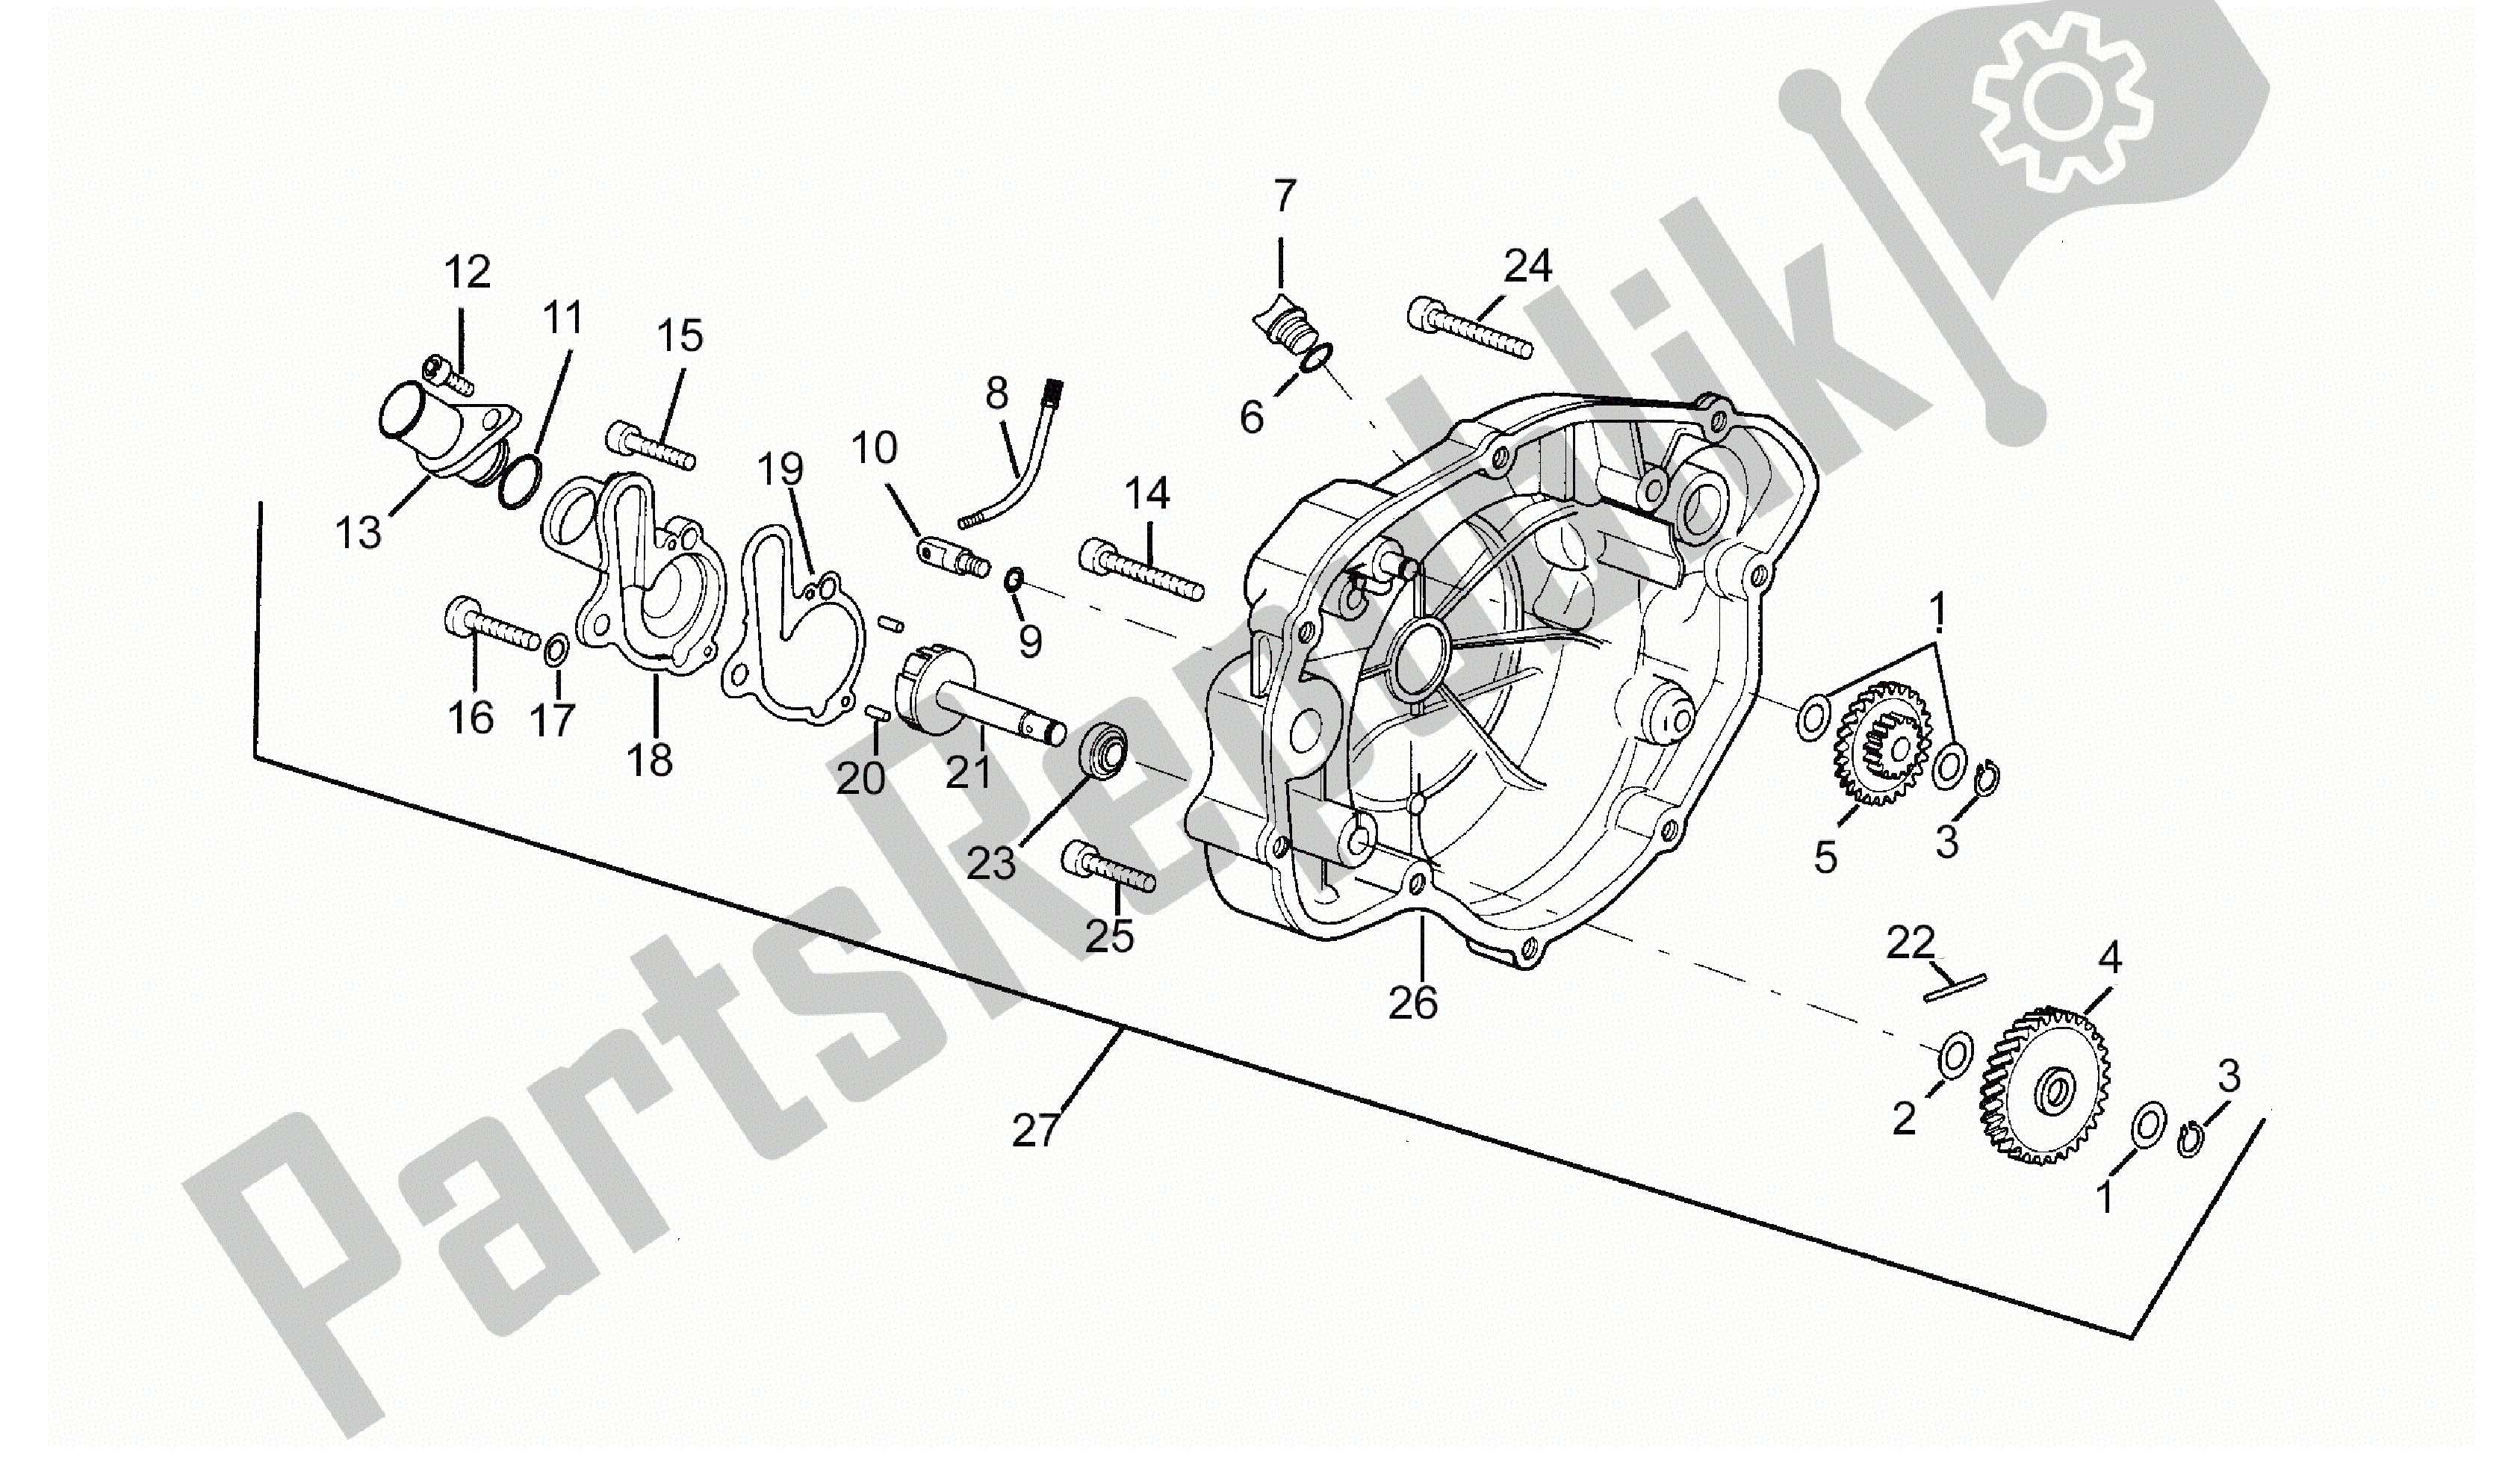 All parts for the Clutch Cover of the Aprilia RS 50 1993 - 1995